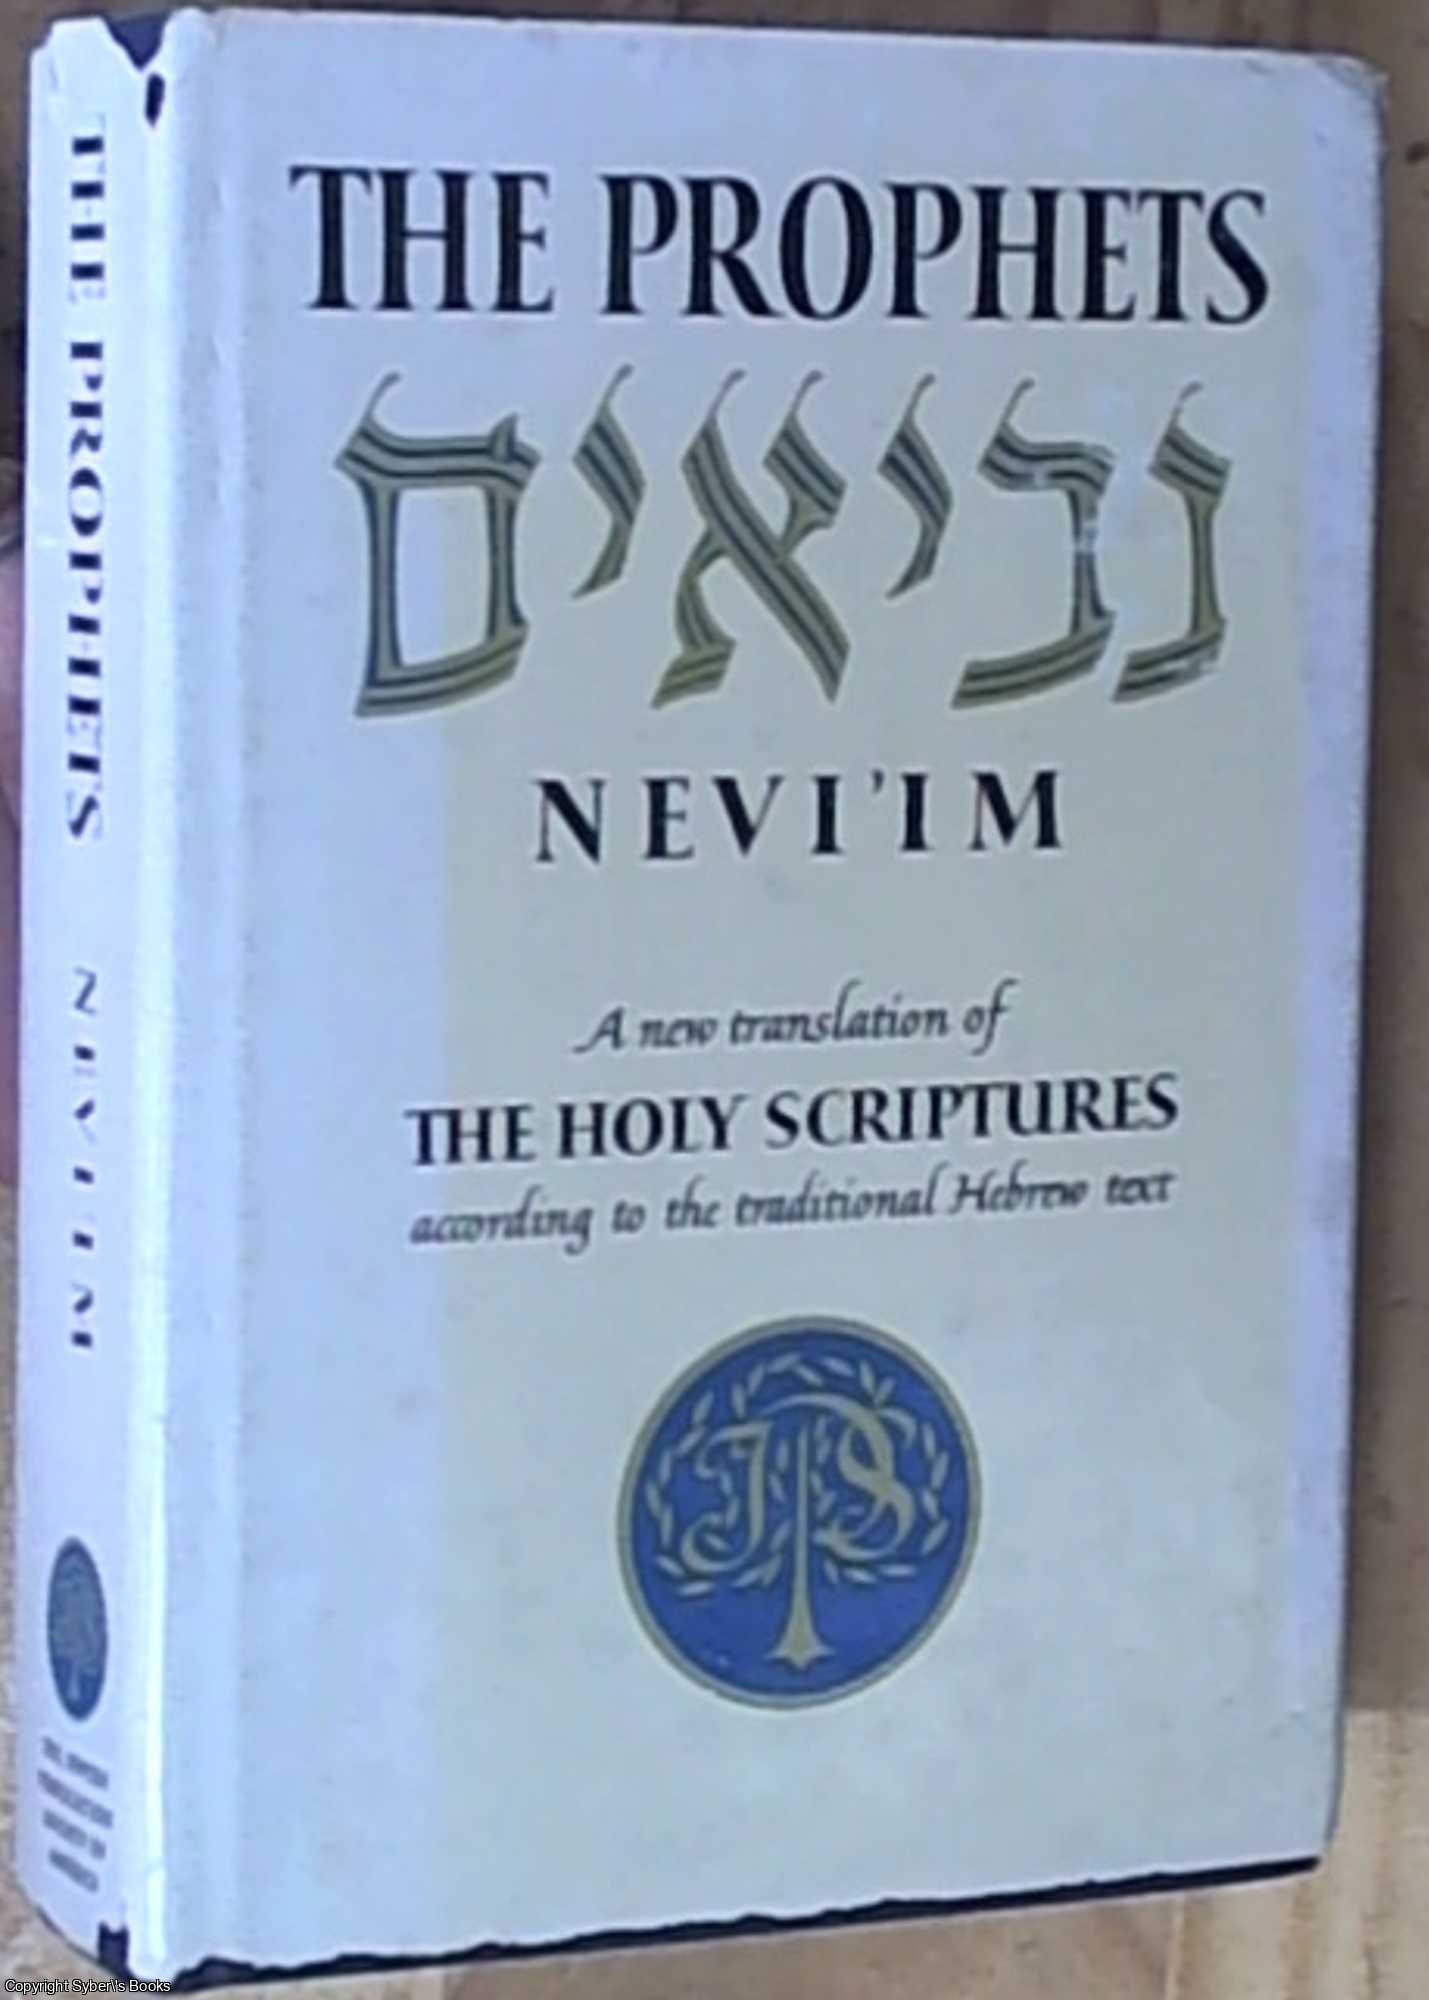 Jewish Publication Society of America  Editors - The Prophets, Nevi'im: A New Translation of the Holy Scriptures According to the Masoretic Text Second Section